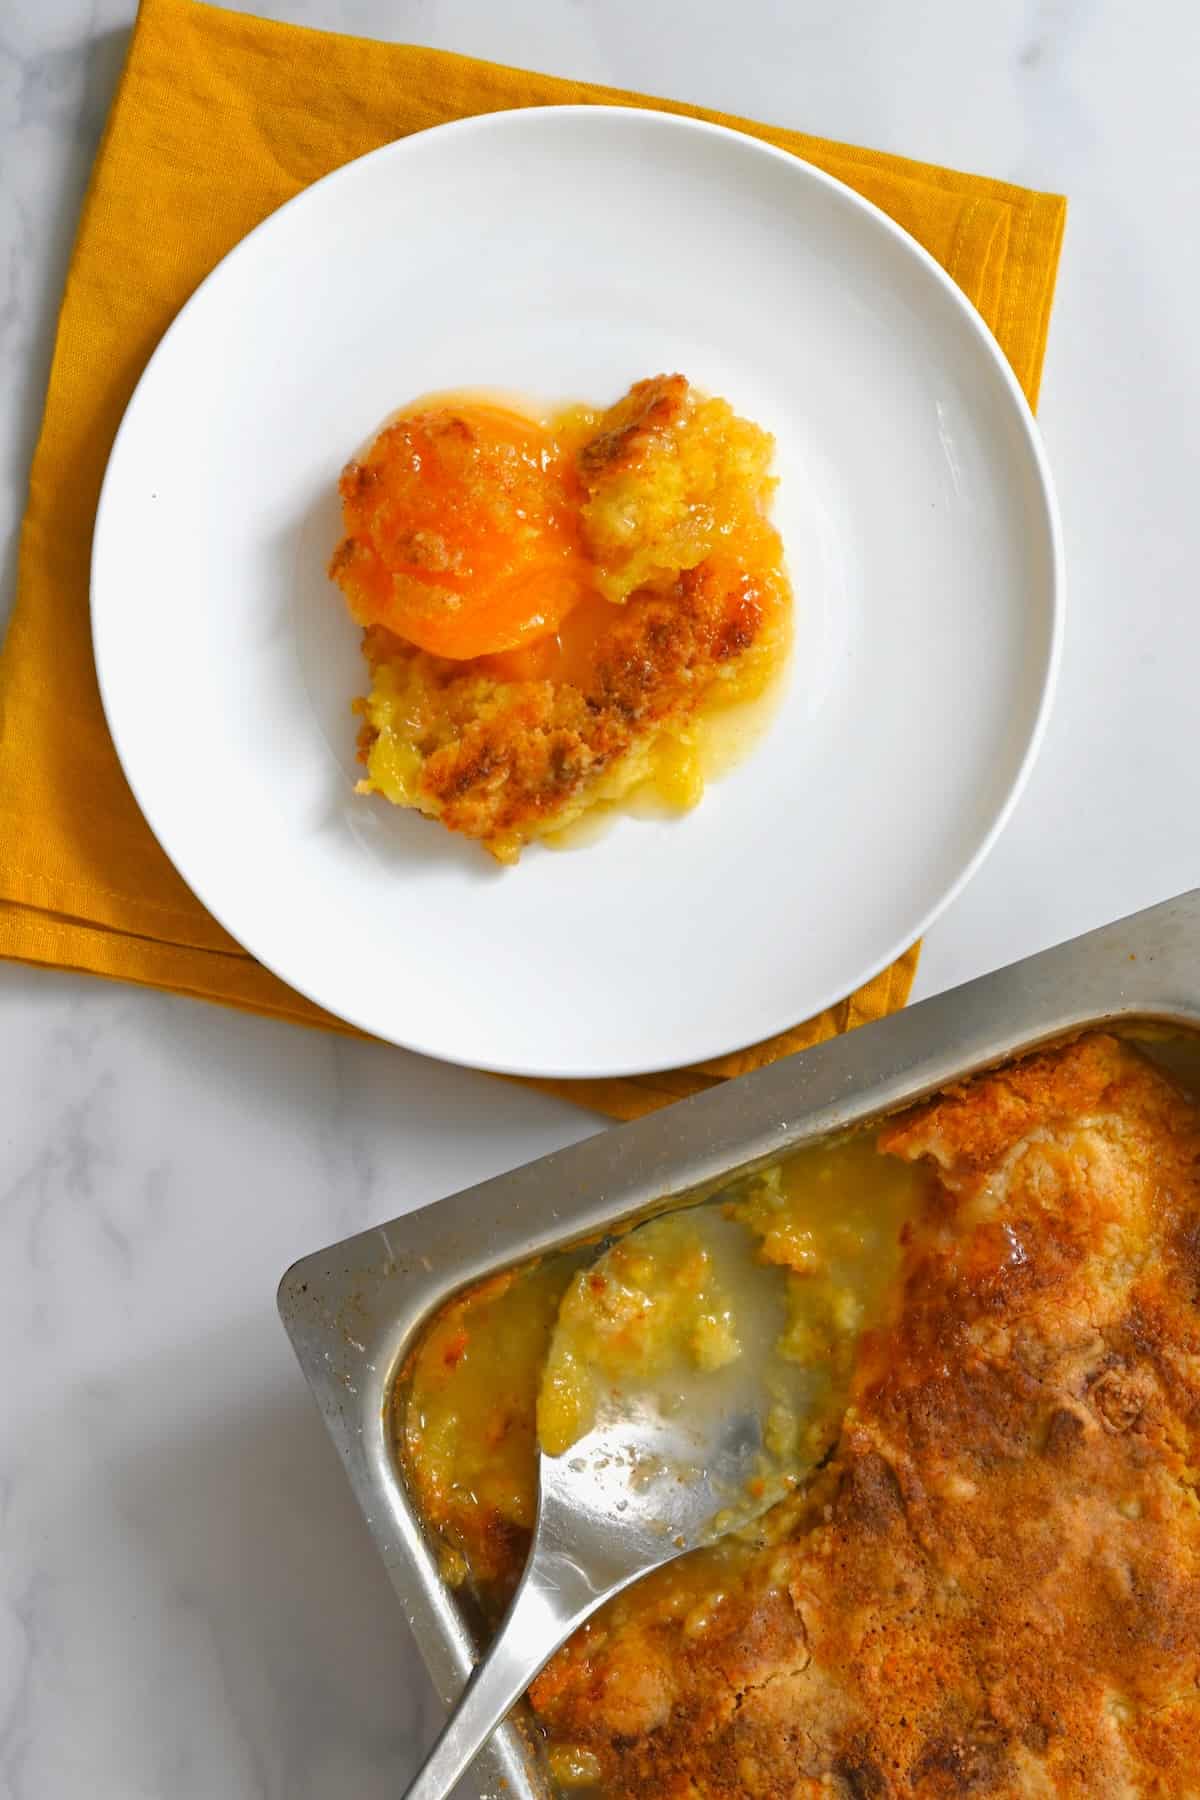 Peach dump cake made with canned peaches